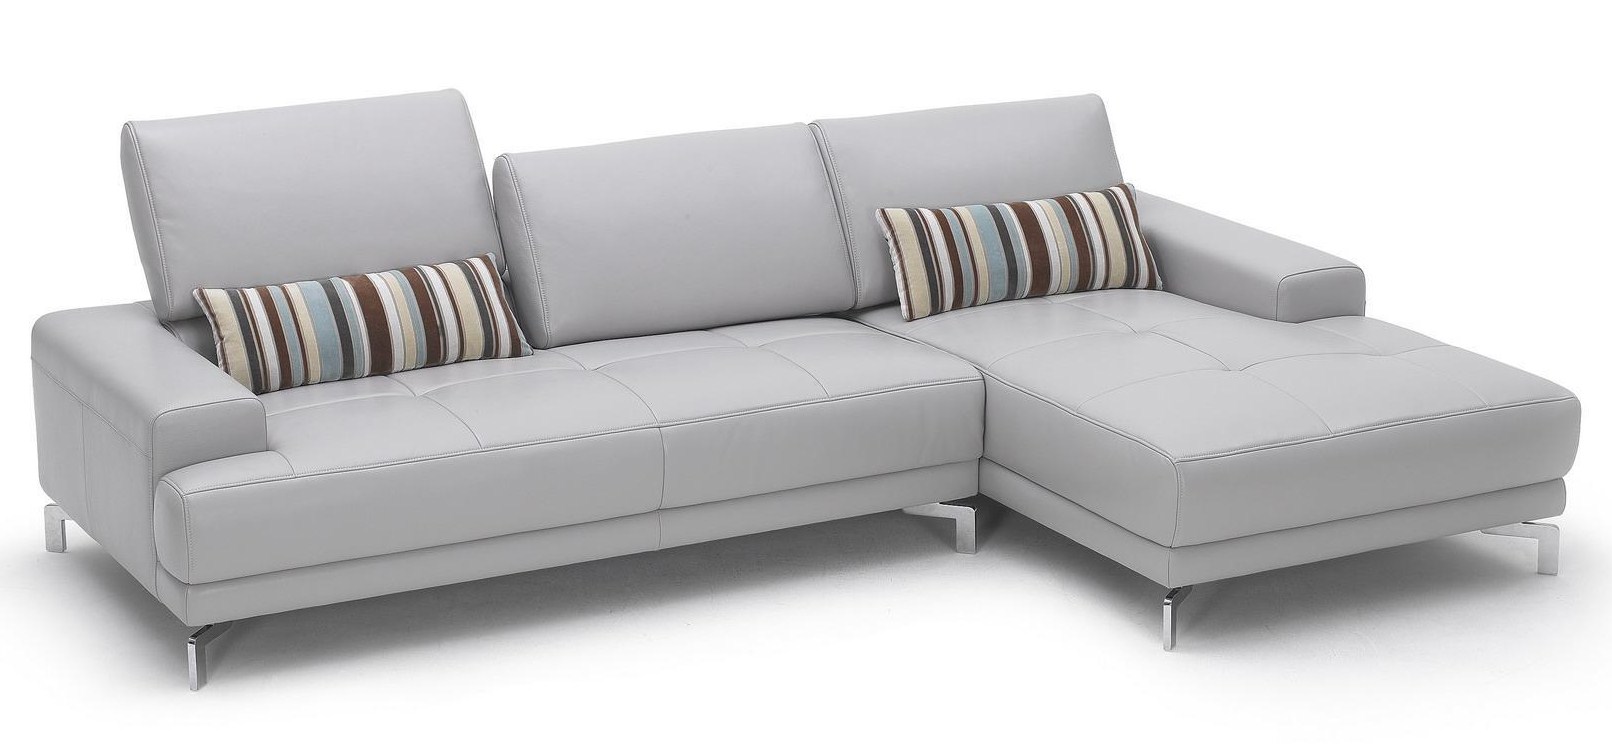 new modern couches best modern couch with moderne sofas sofa LLAKBRN